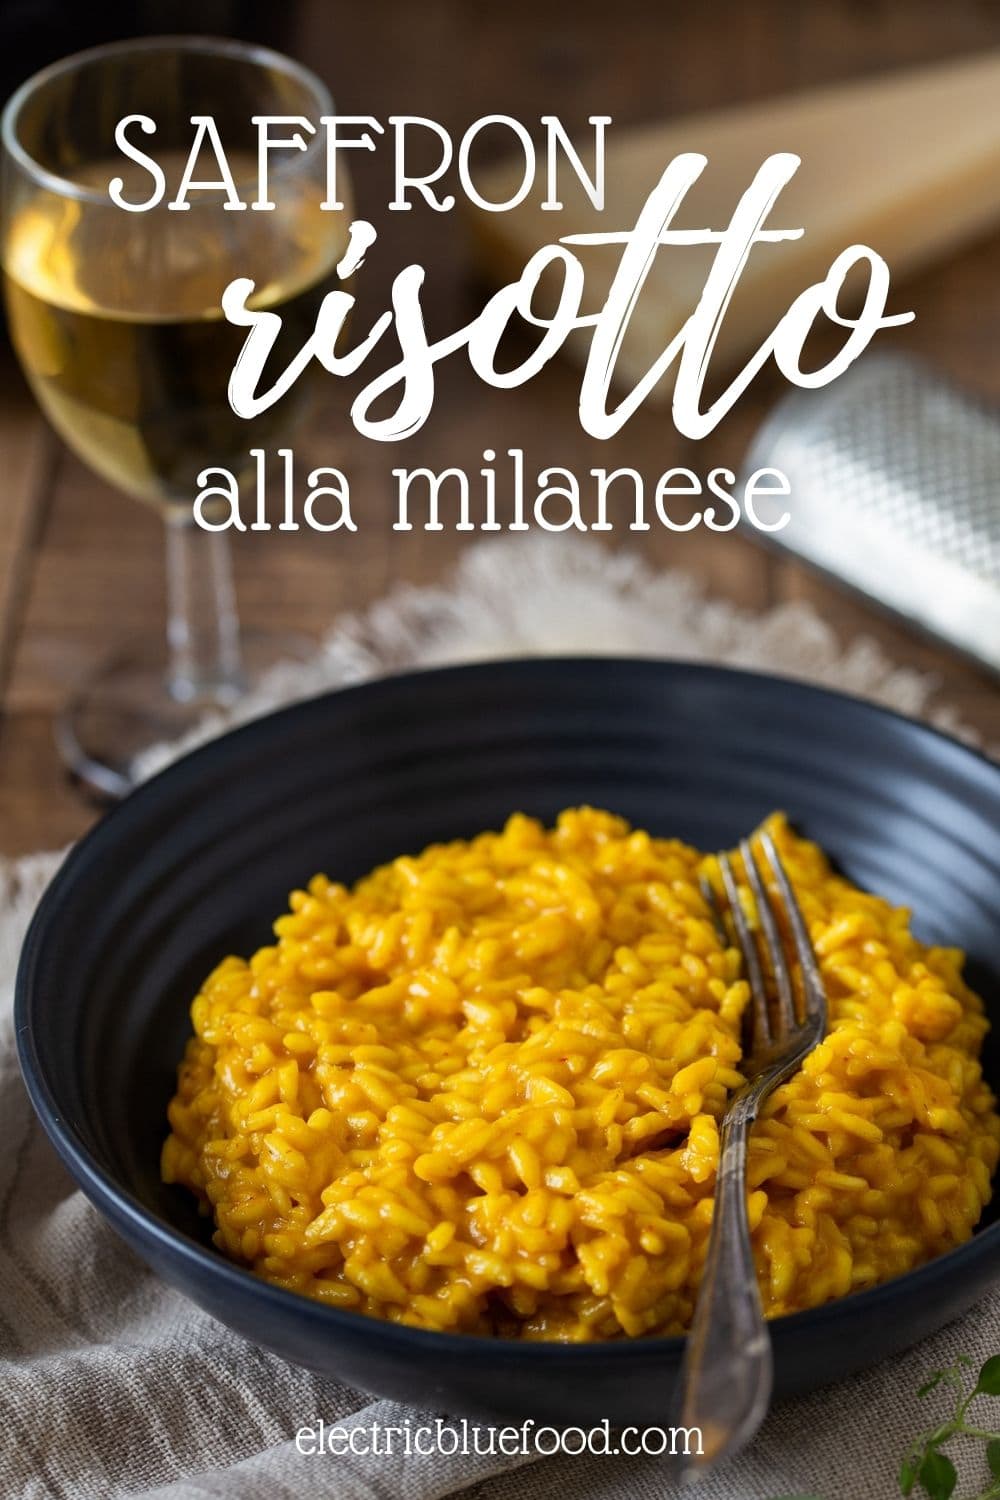 Authentic saffron risotto alla milanese with saffron, parmesan and beef broth. A traditional recipe from northern Italy for a flavourful main course or side.